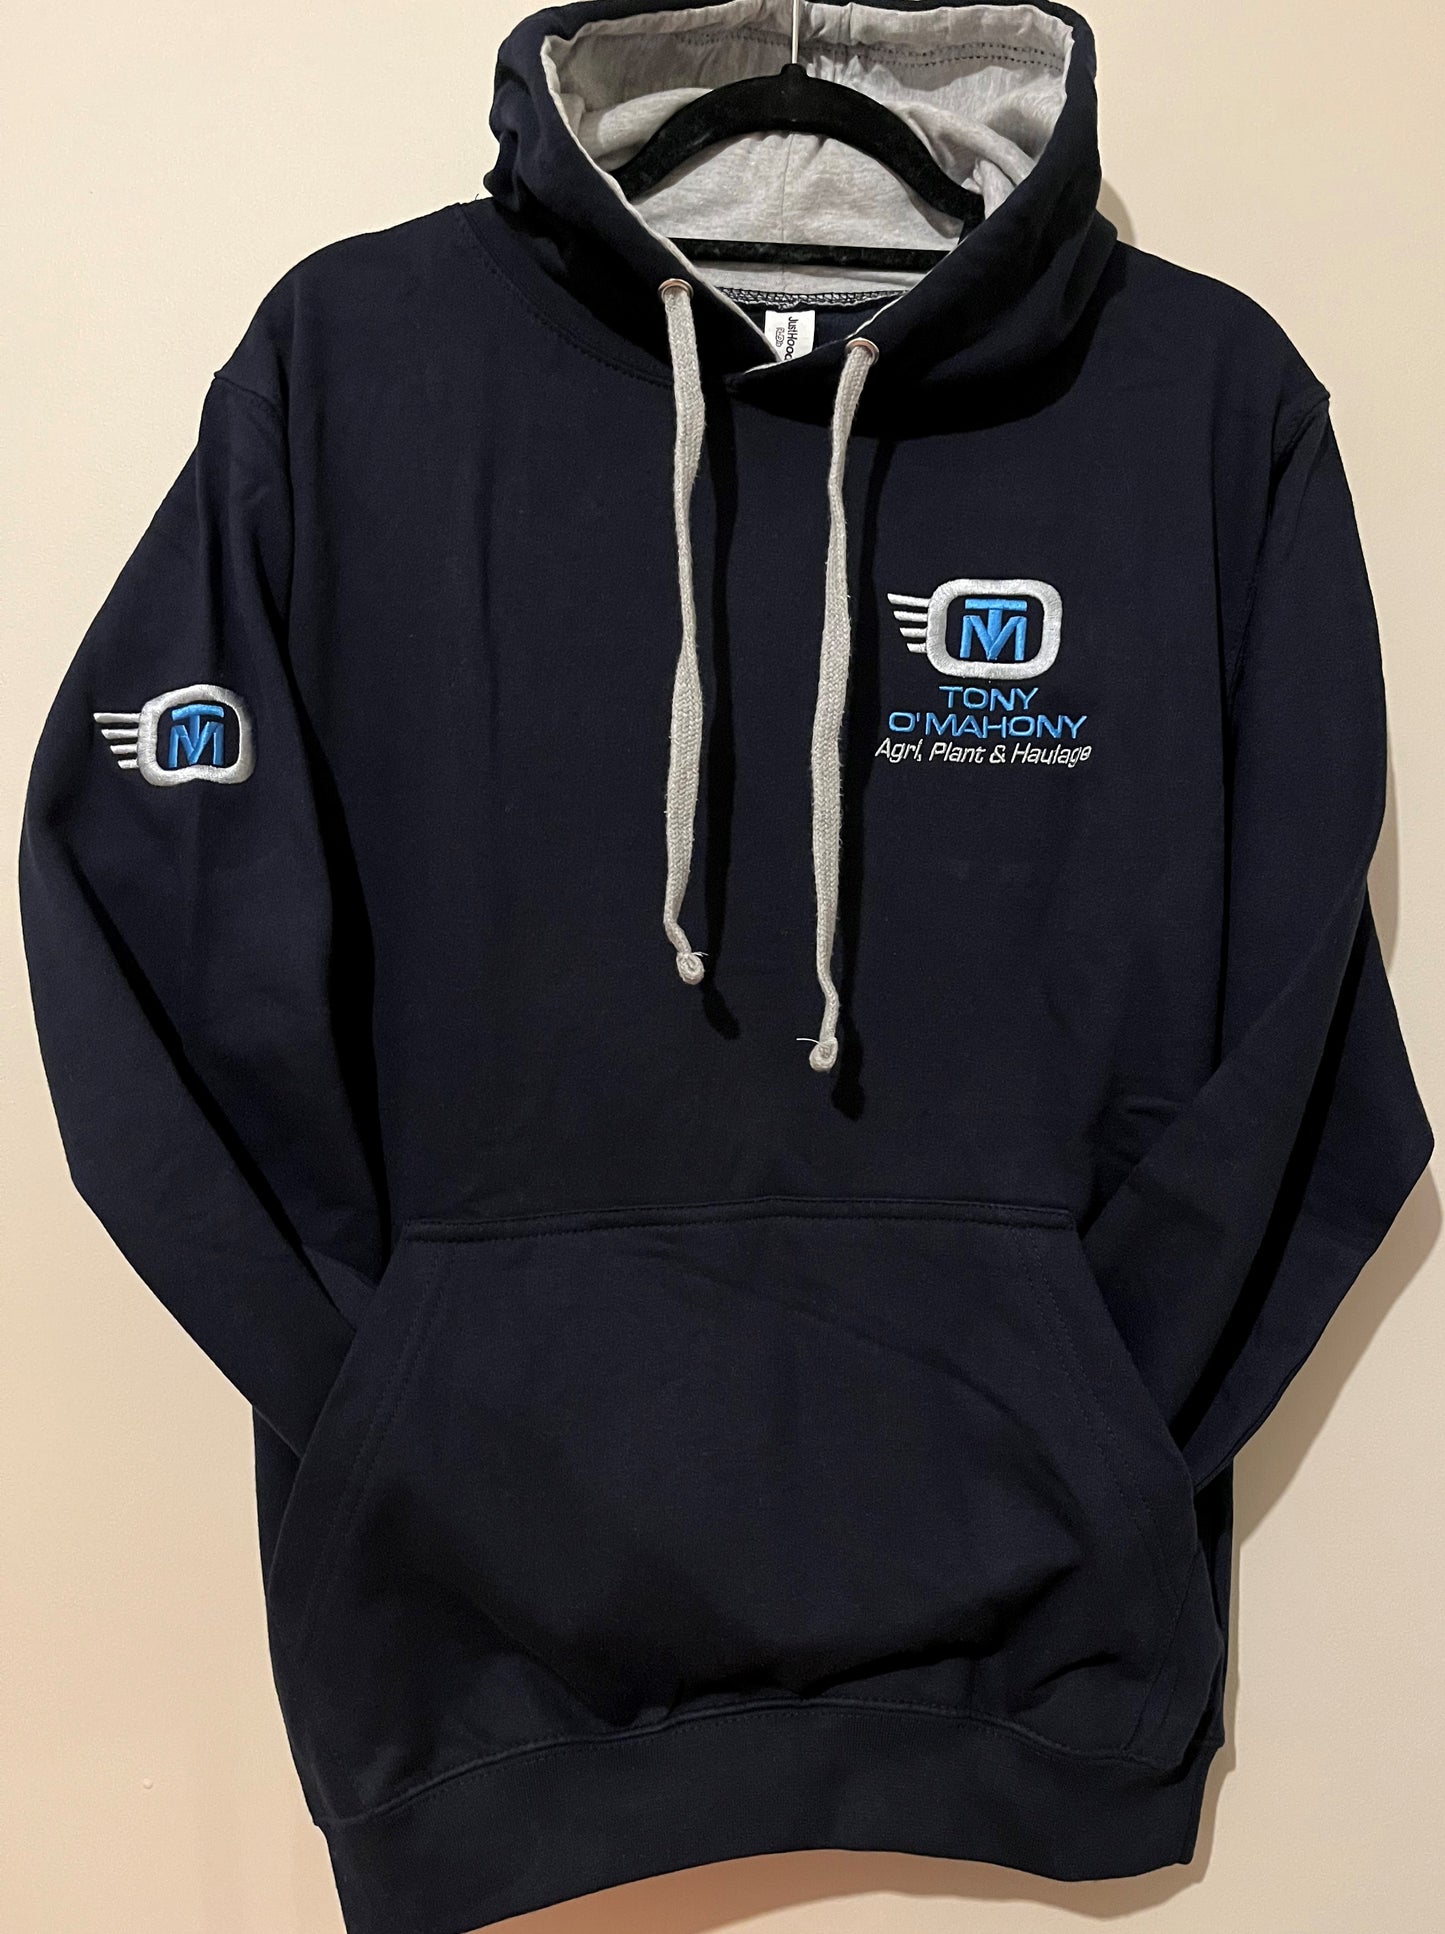 Adults Navy and Grey Hoody